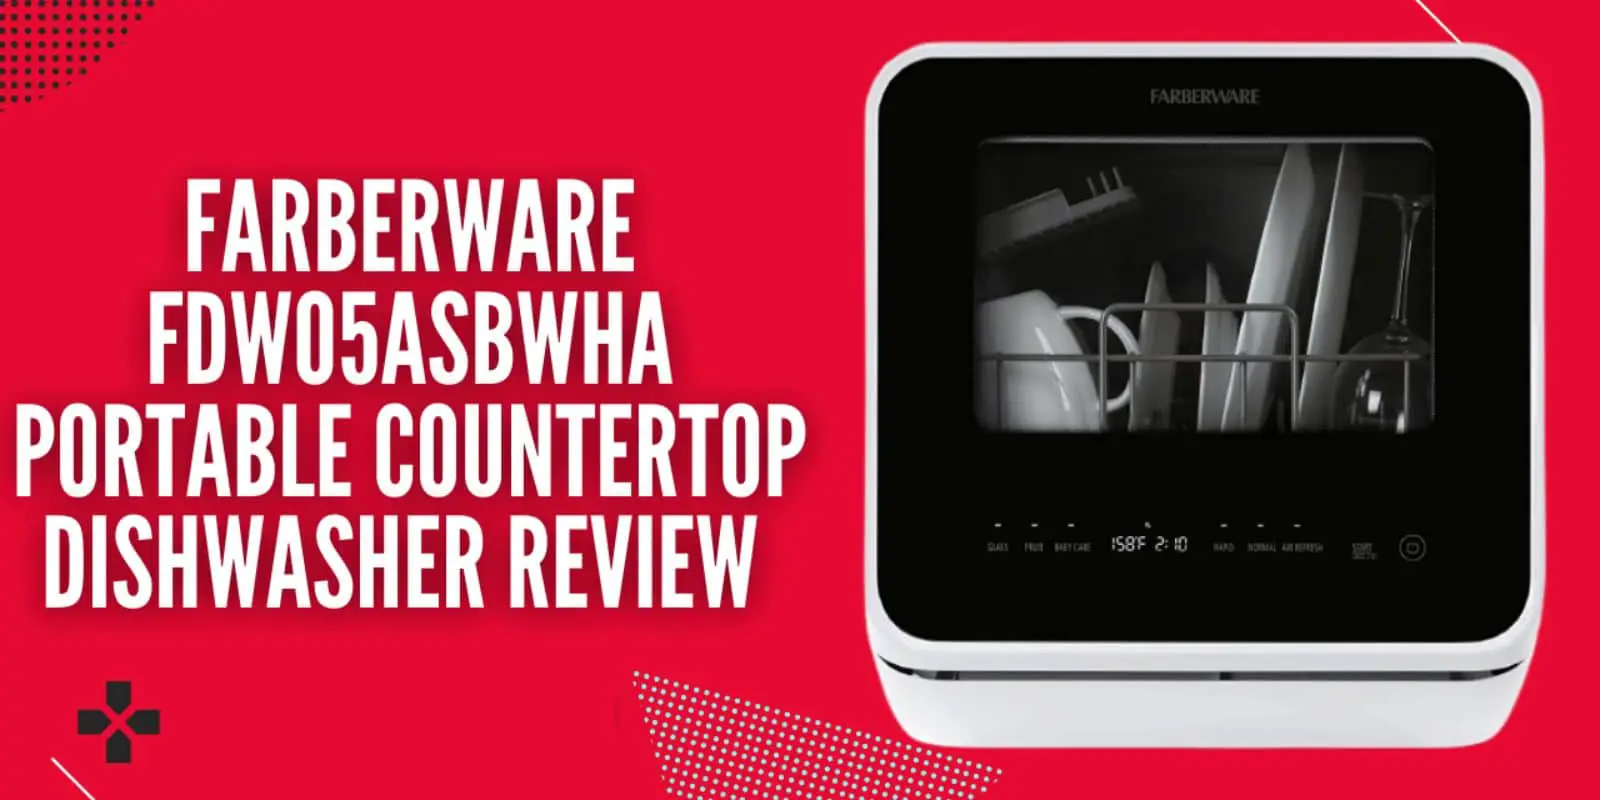 Farberware FDW05ASBWHA Portable Countertop Dishwasher Review | Features, Pros & Cons